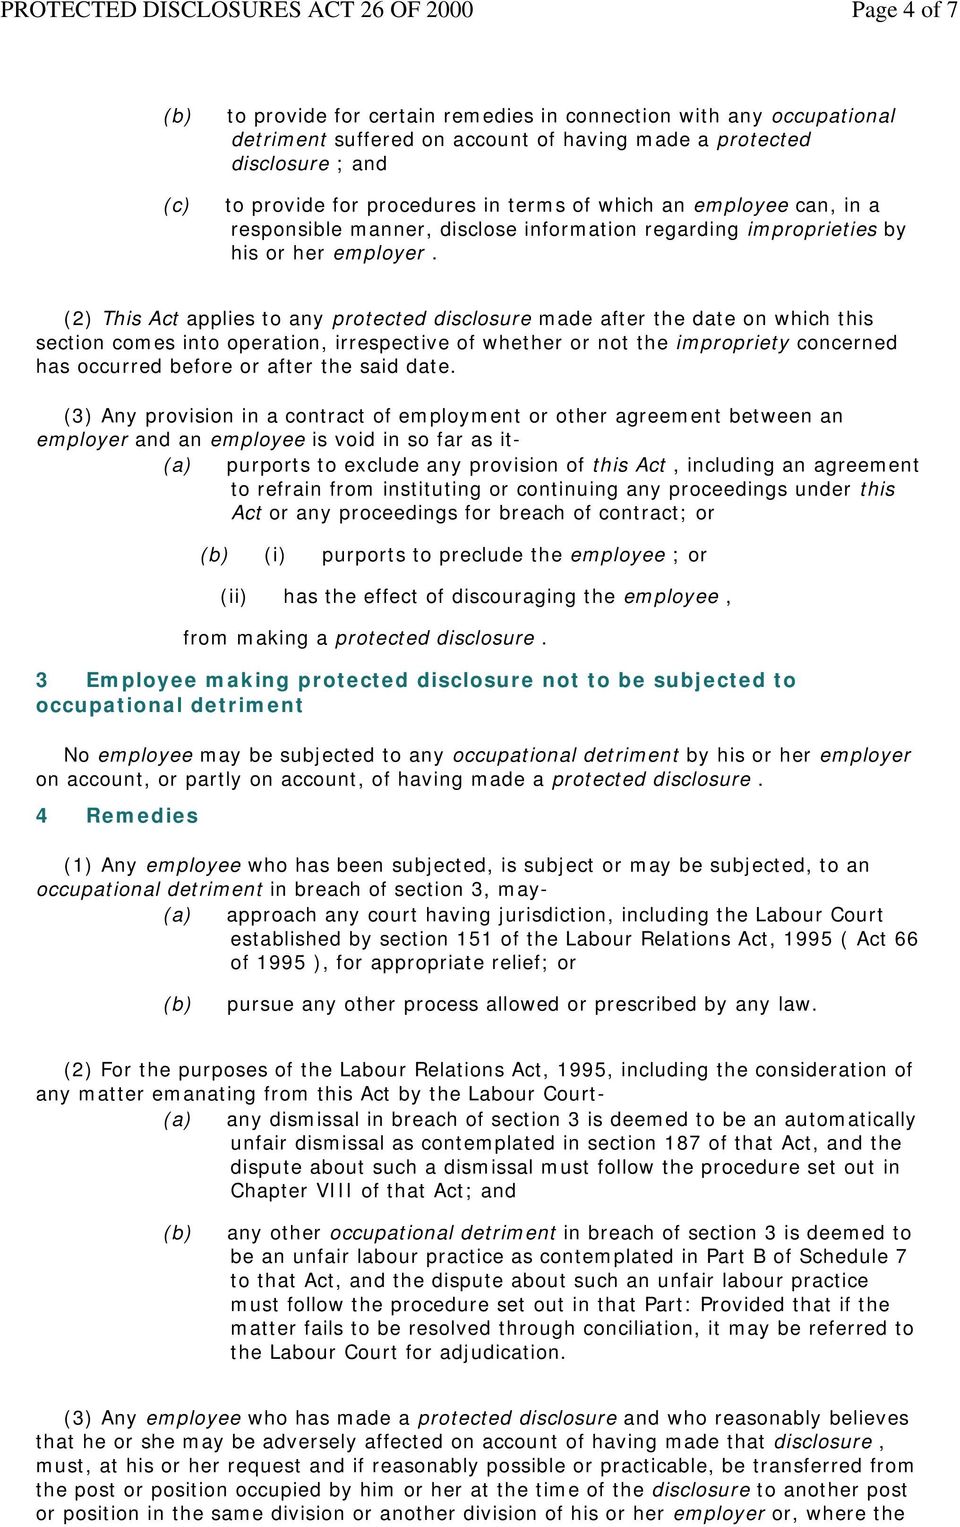 (2) This Act applies to any protected disclosure made after the date on which this section comes into operation, irrespective of whether or not the impropriety concerned has occurred before or after